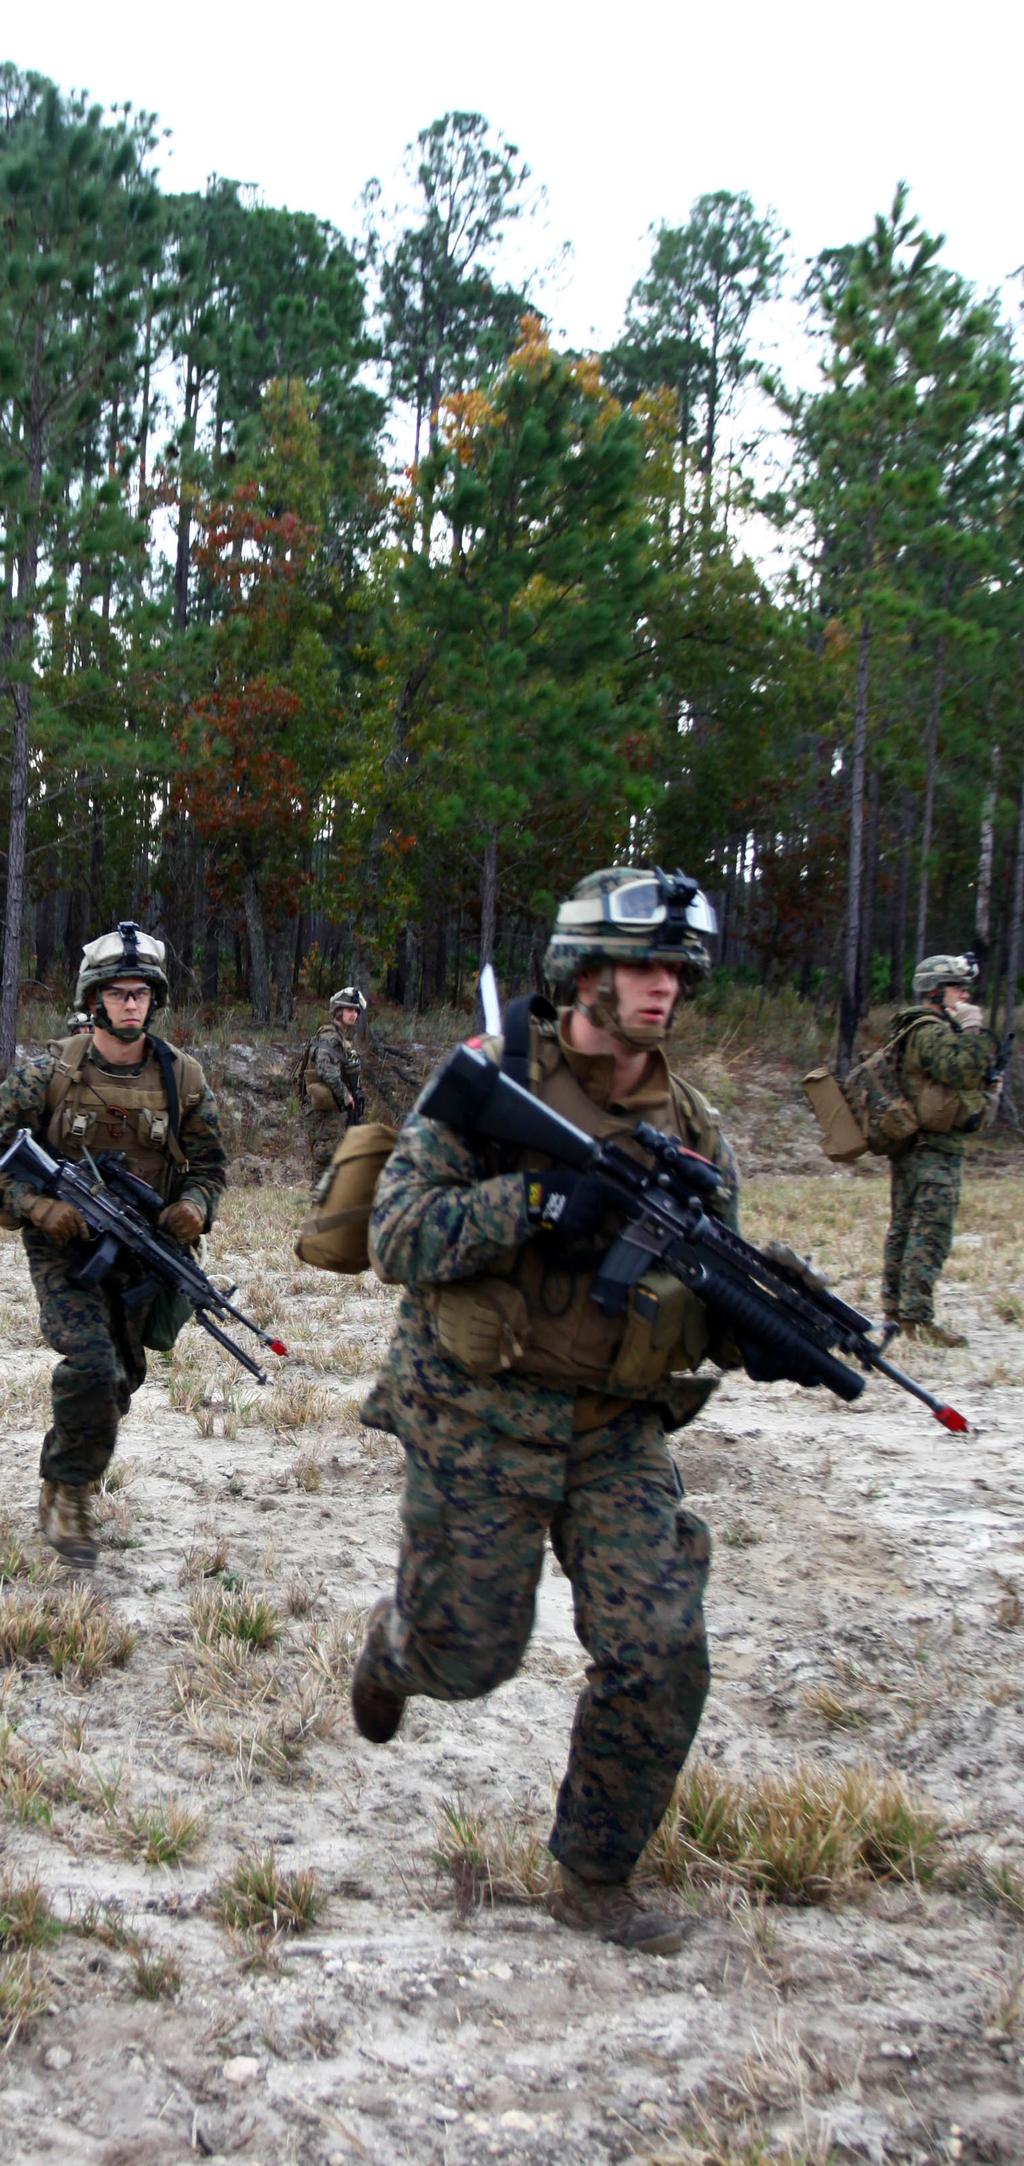 Camp Blanding possesses billeting to accommodate more than 3,500 personnel and ranges which can support training for small arms weapons, mortars, artillery, attack helicopter gunnery and